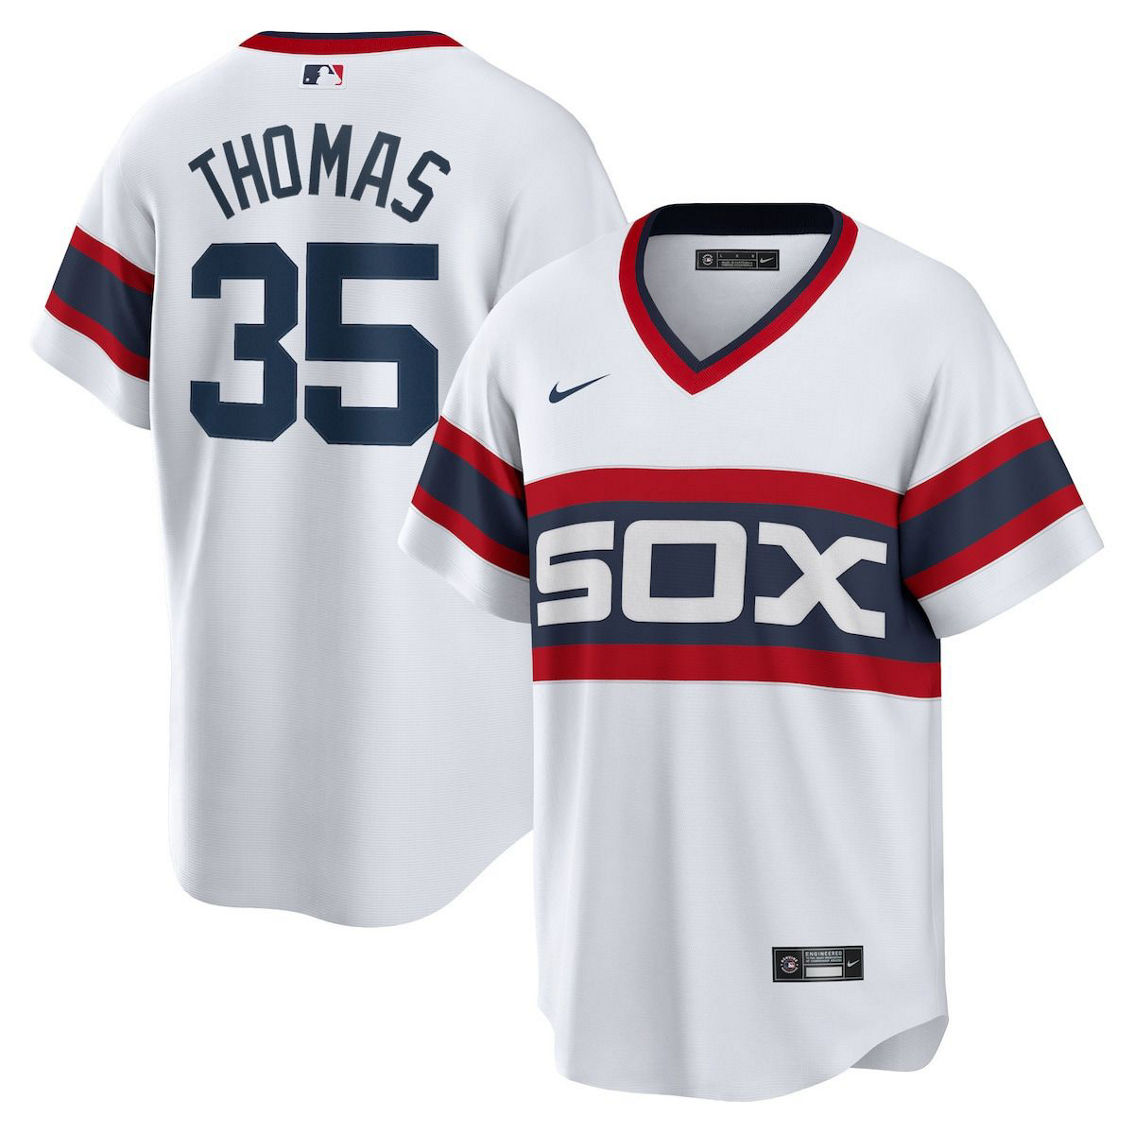 Nike Men's Frank Thomas White Chicago White Sox Home Cooperstown Collection Player Jersey - Image 2 of 4